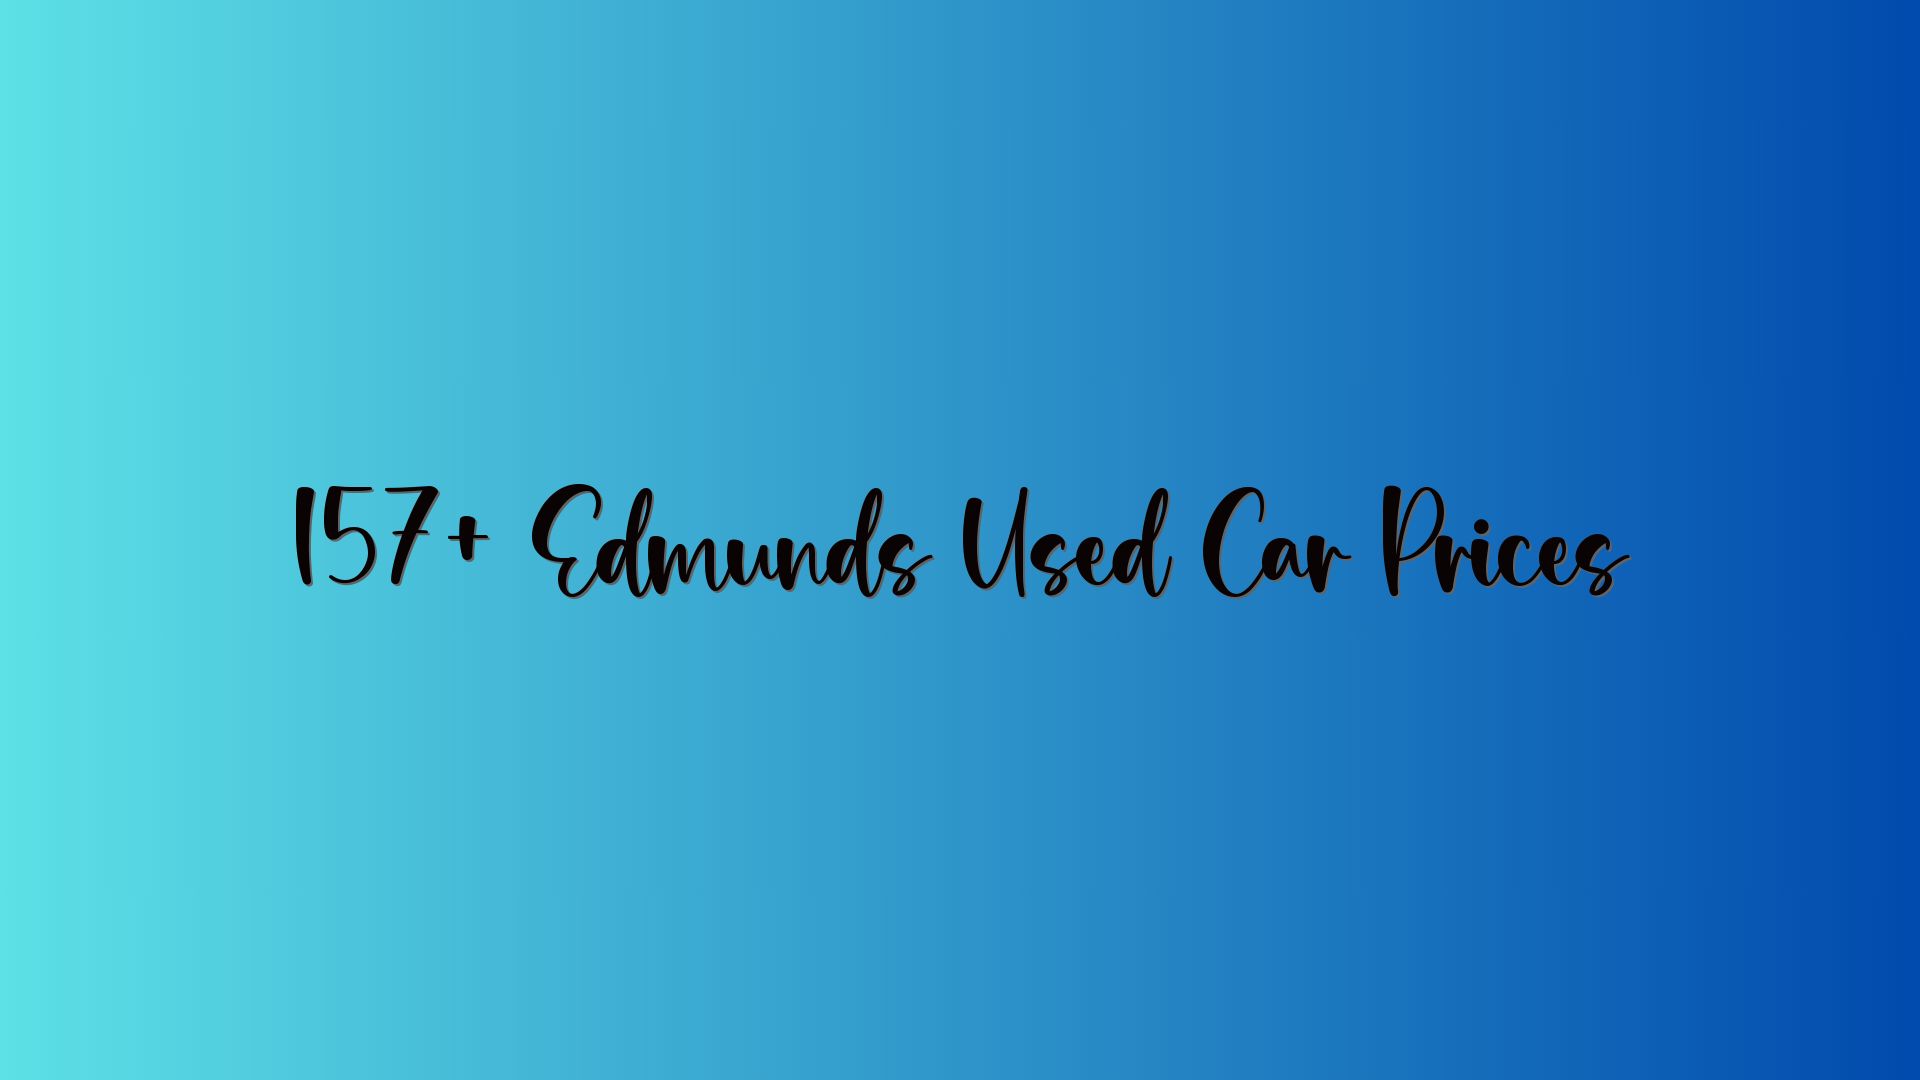 157+ Edmunds Used Car Prices